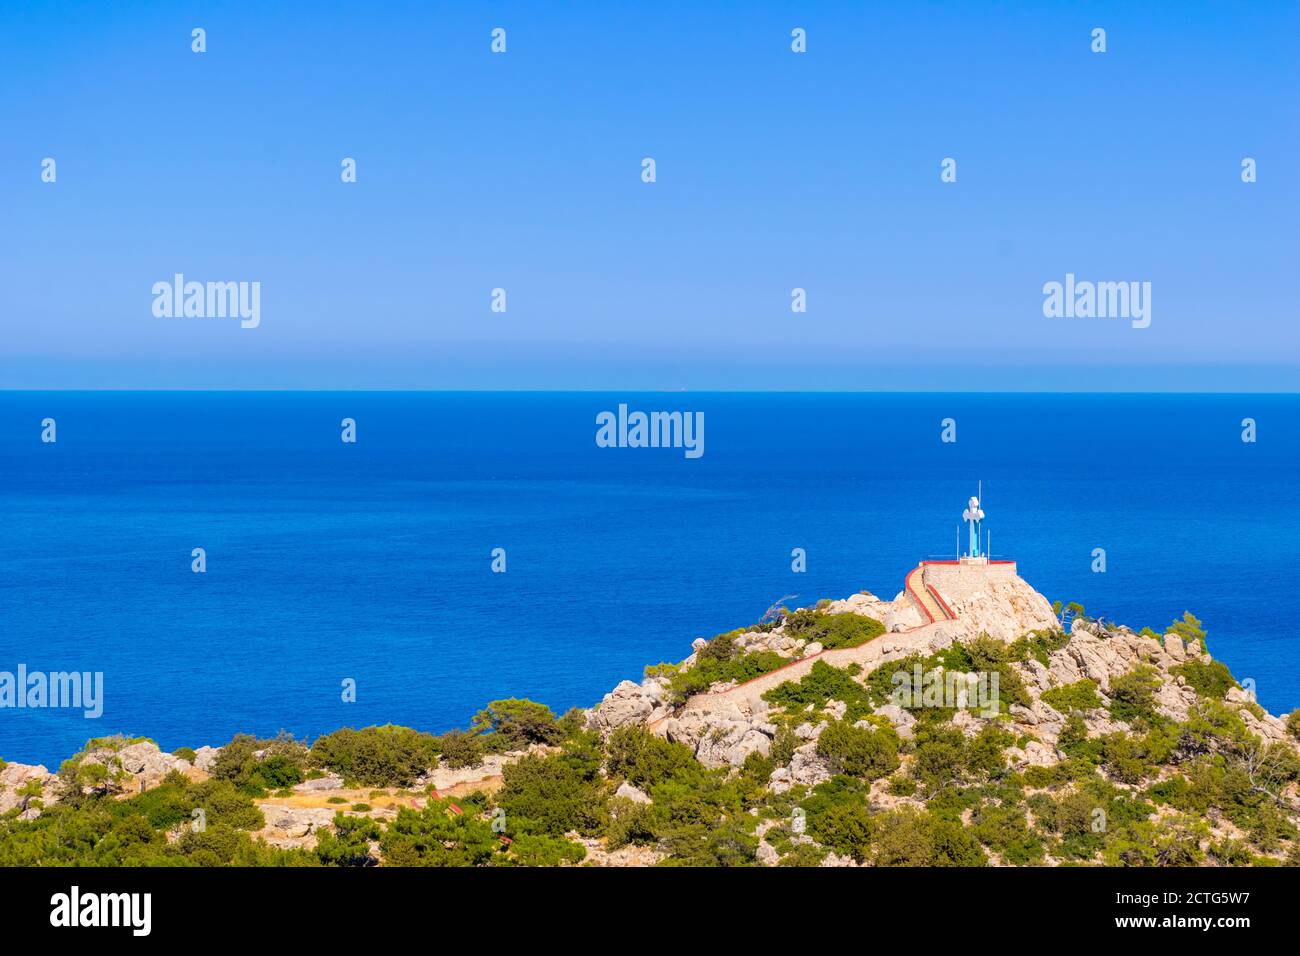 Panoramic view of Large Religious Cross on top of a hill with Aegean Sea in the background, Karpathos Island, Greece Stock Photo